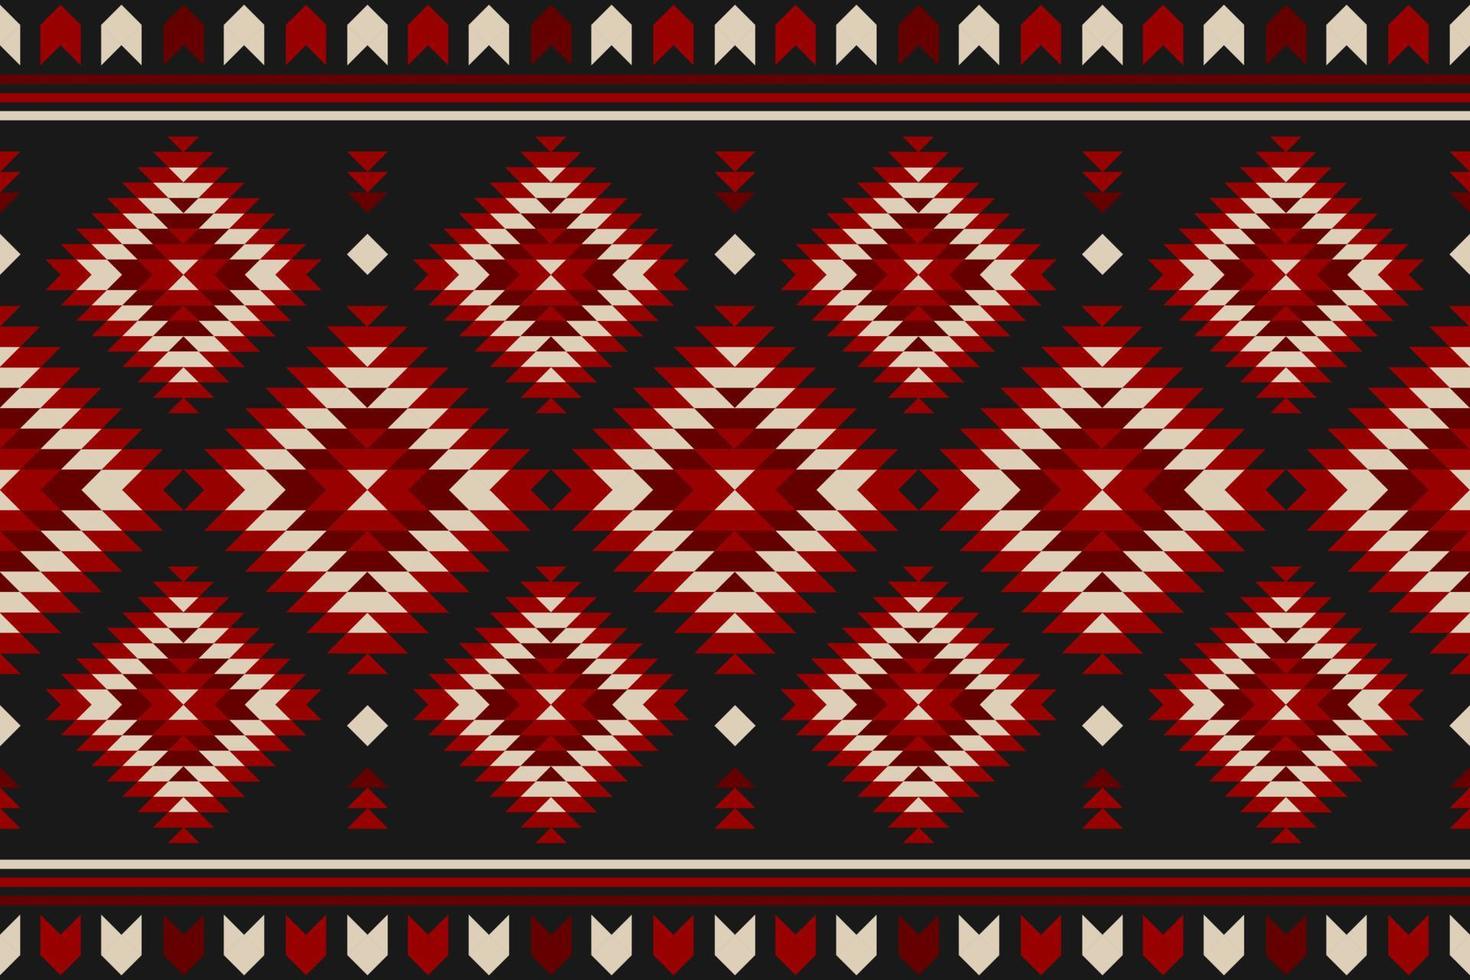 Carpet tribal pattern art. Geometric ethnic seamless pattern traditional. Aztec ethnic ornament print. Mexican style. vector